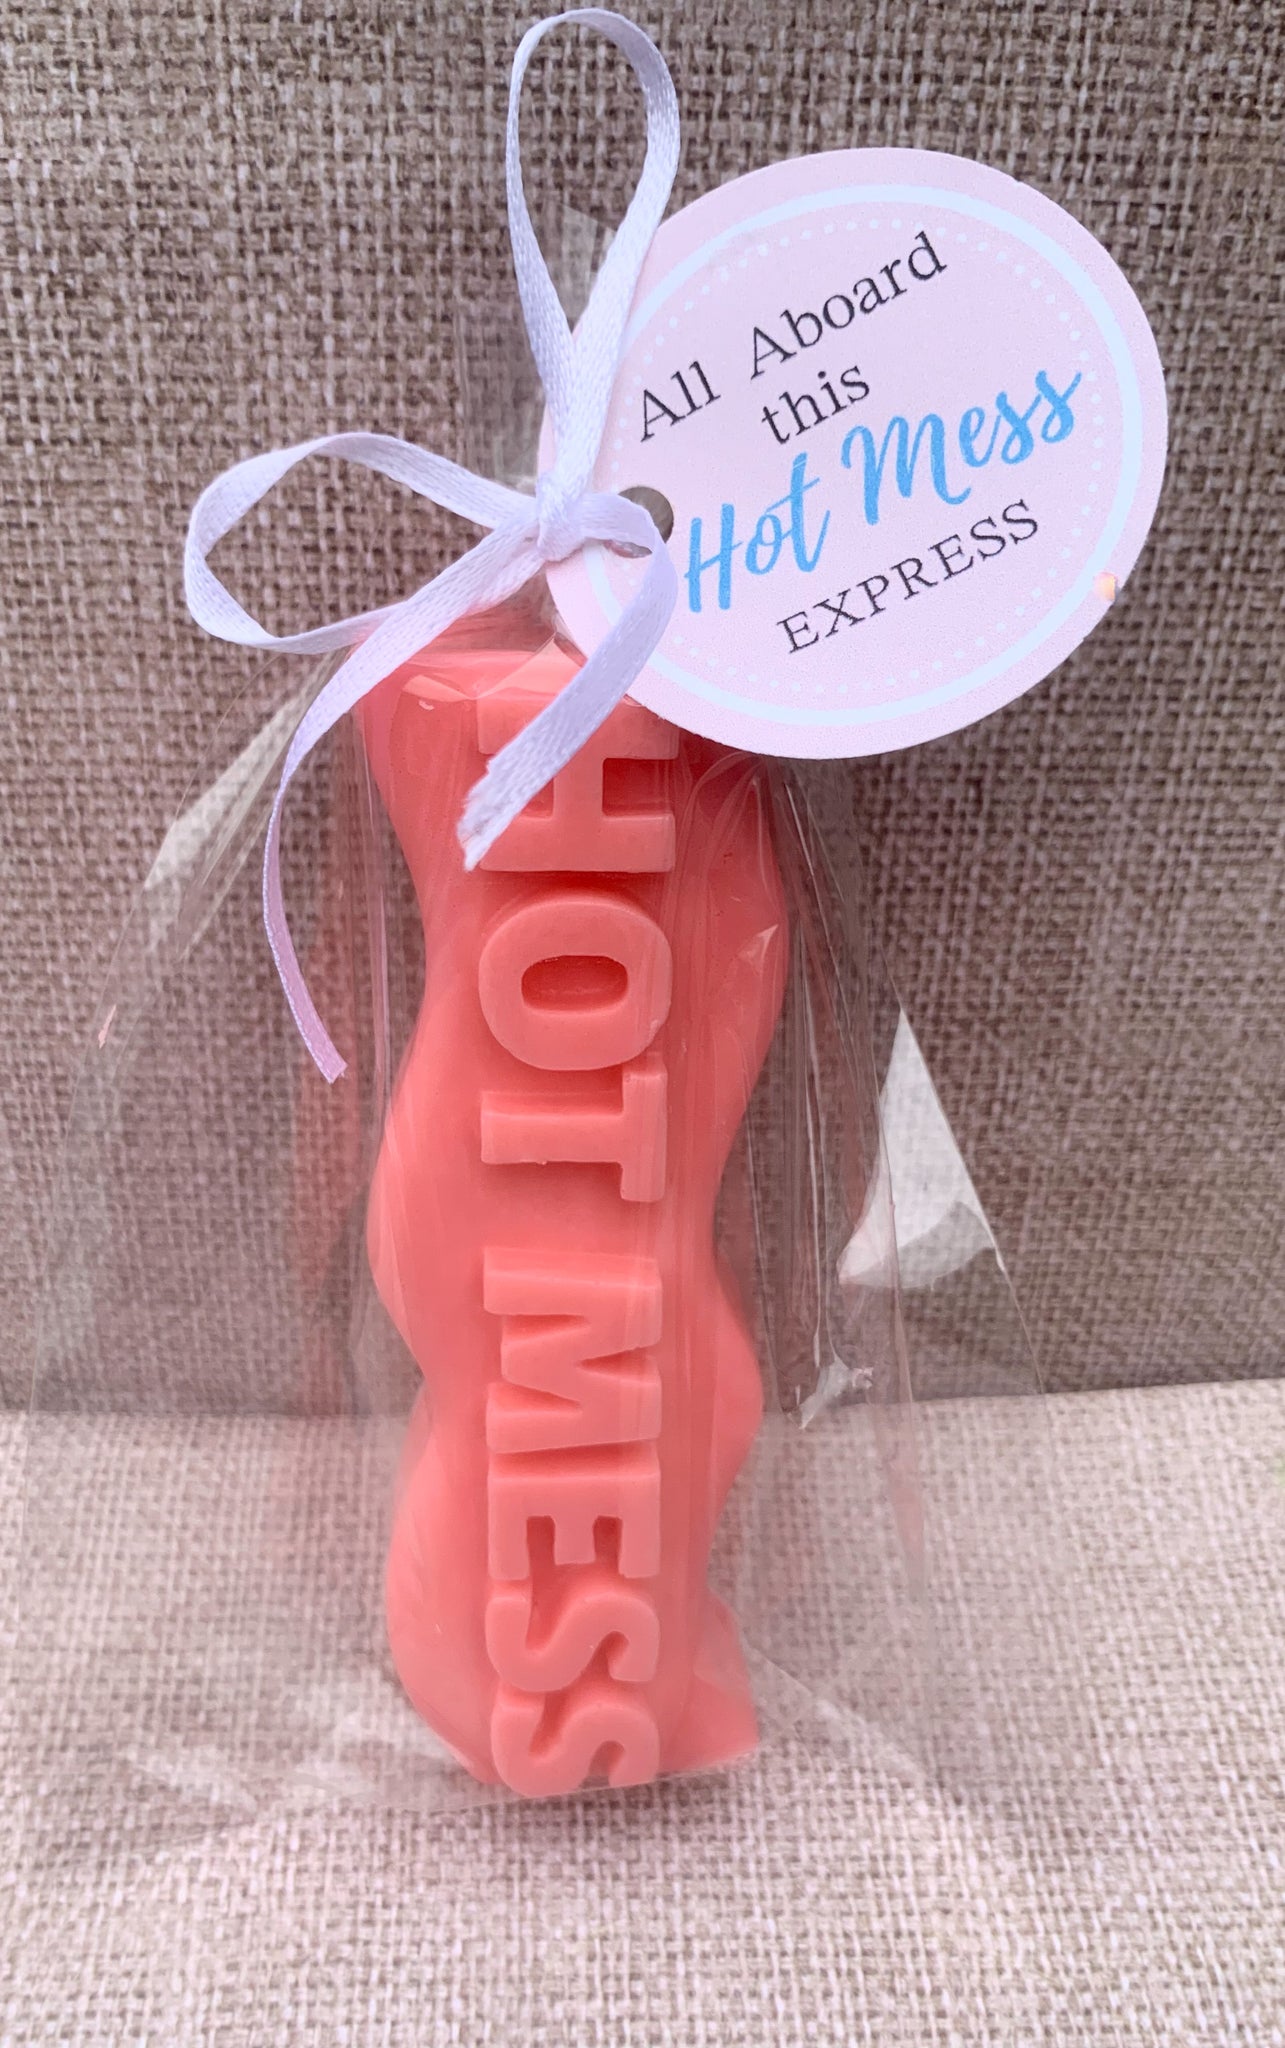 Hot Mess themed bar of soap